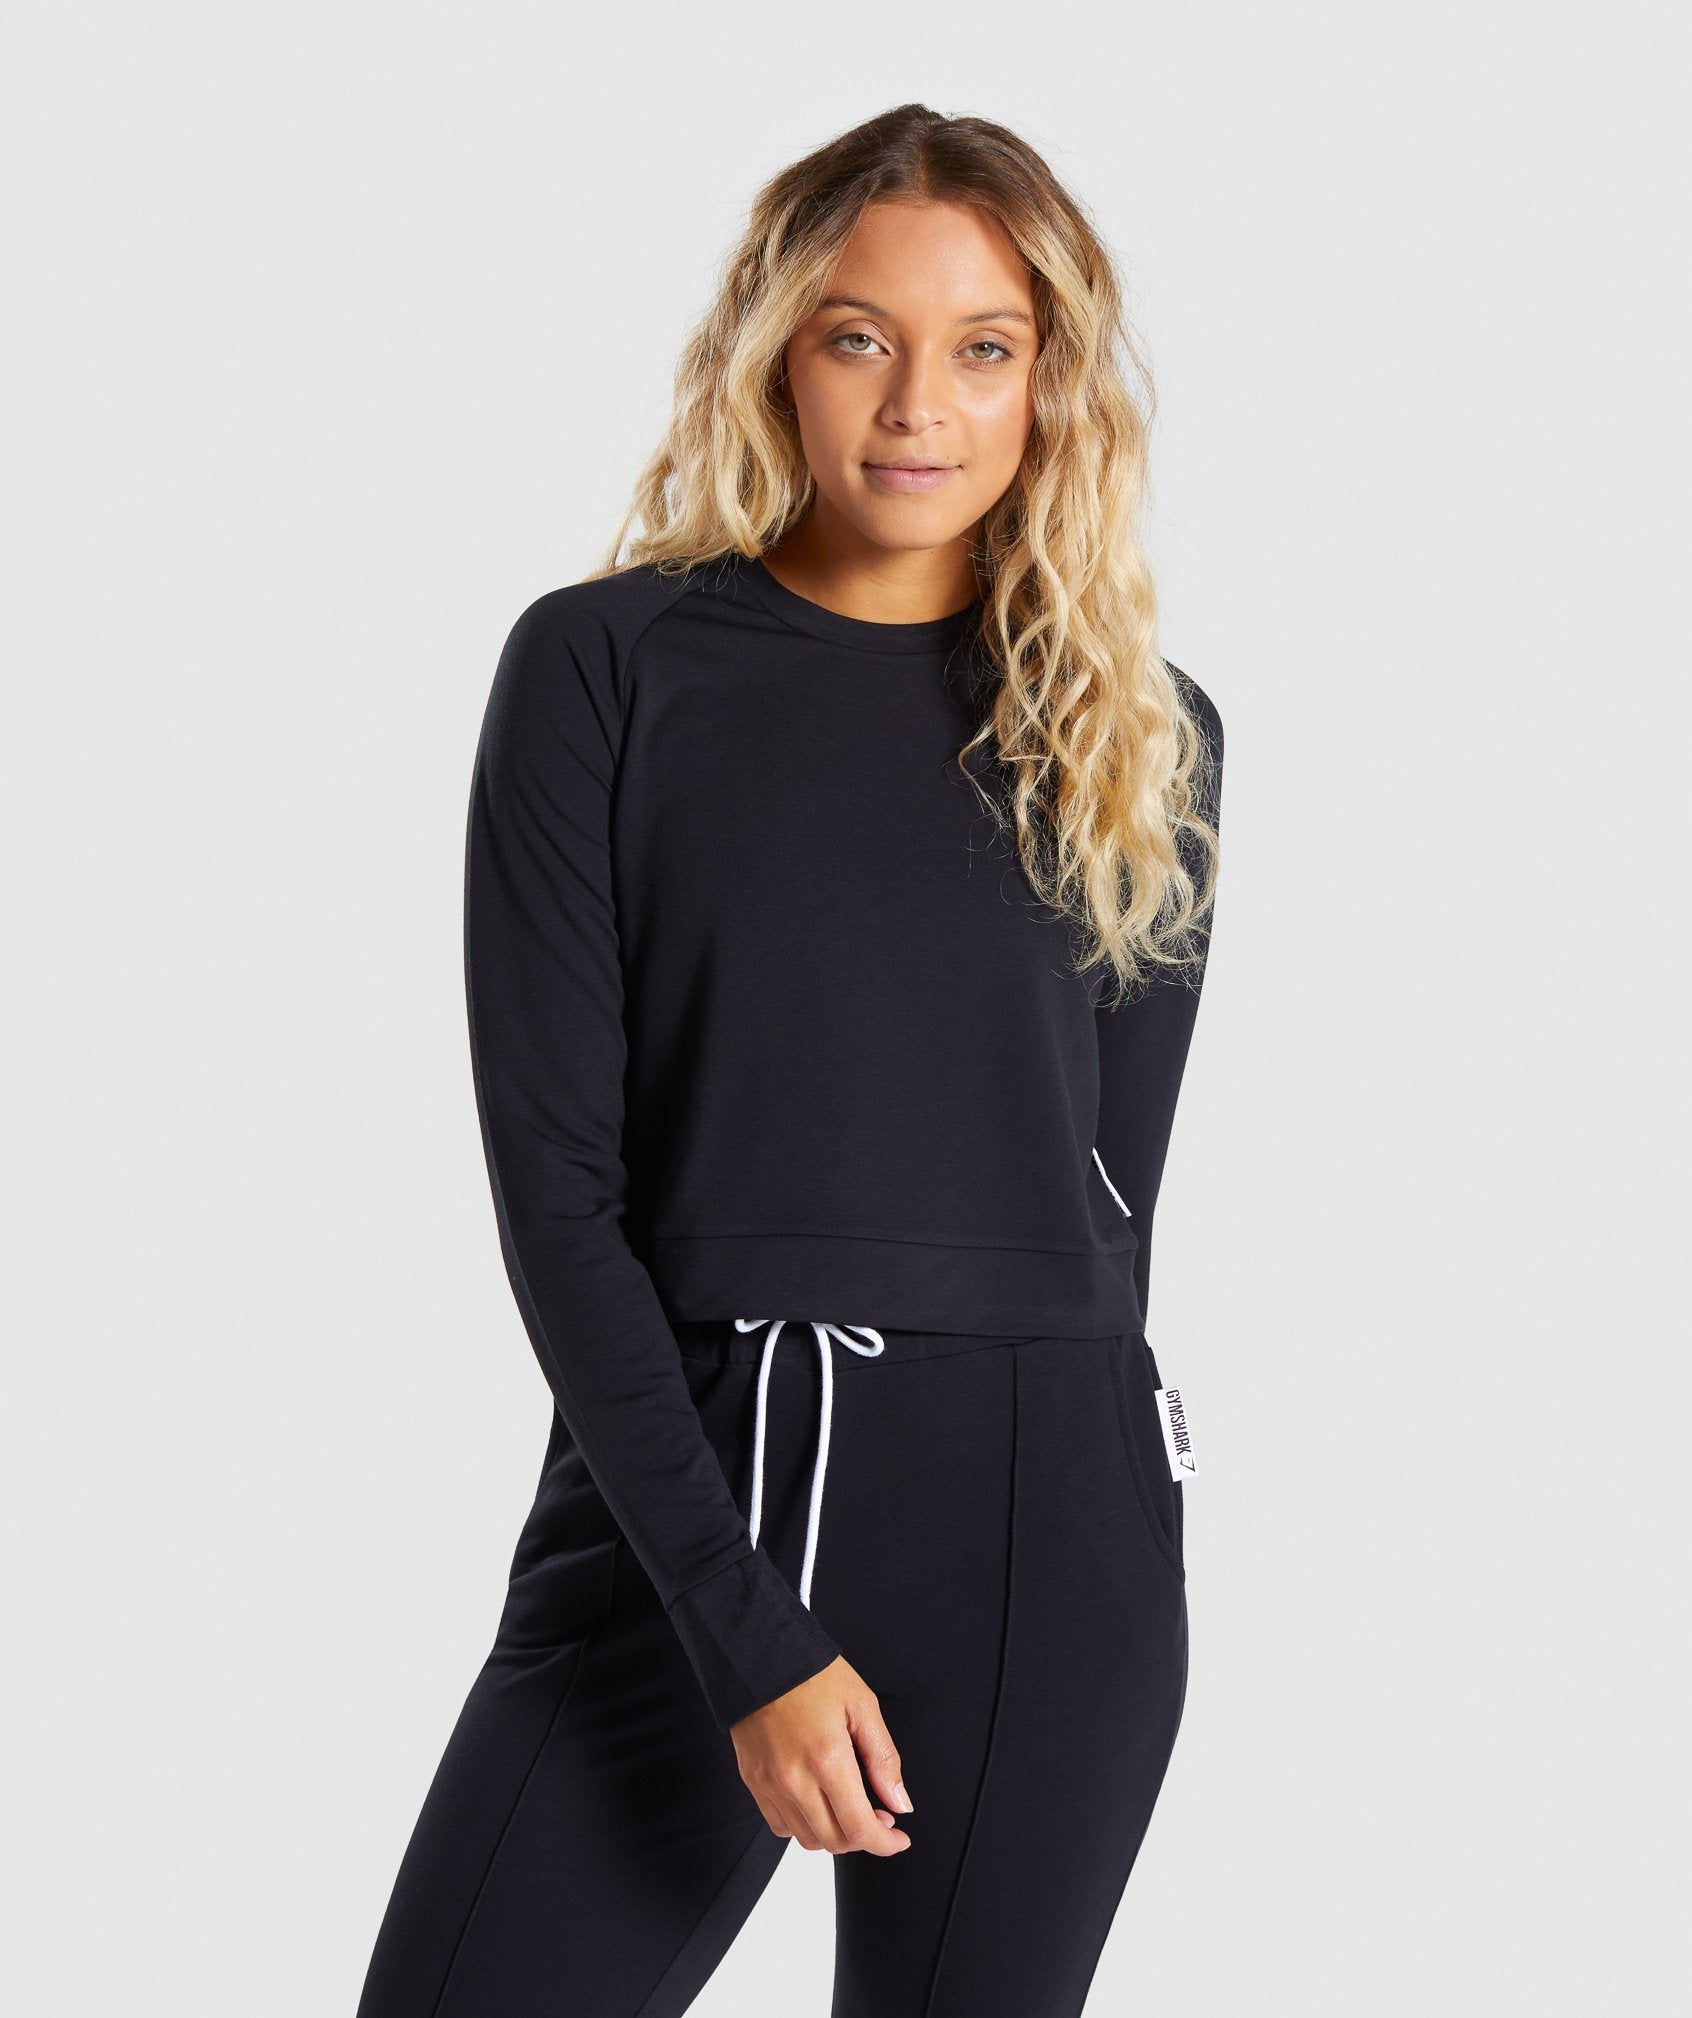 Solace Sweater 2.0 in Black